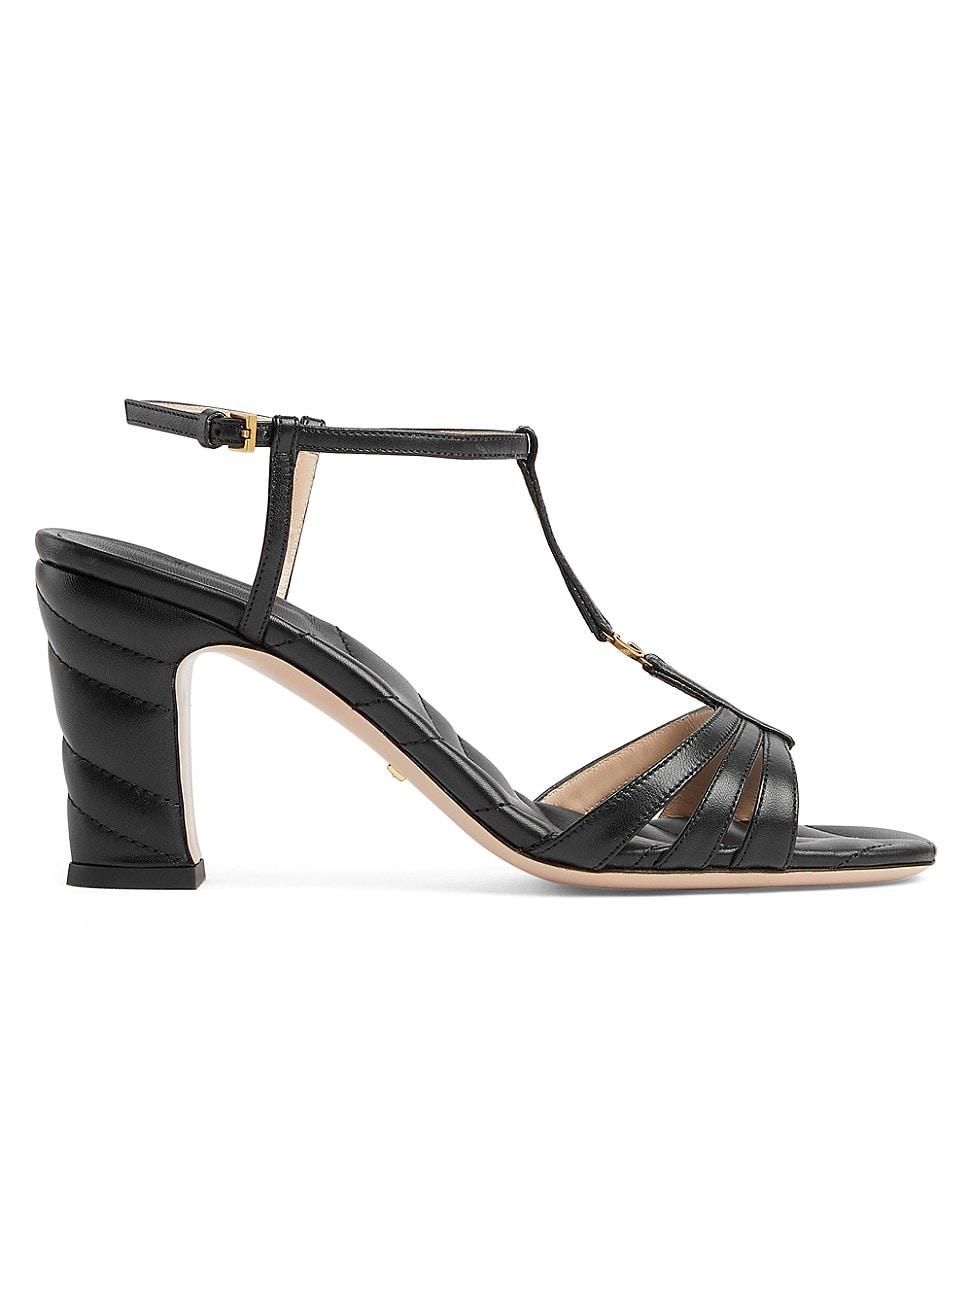 Gucci Marmont Leather Block-heel Sandals in Black | Lyst